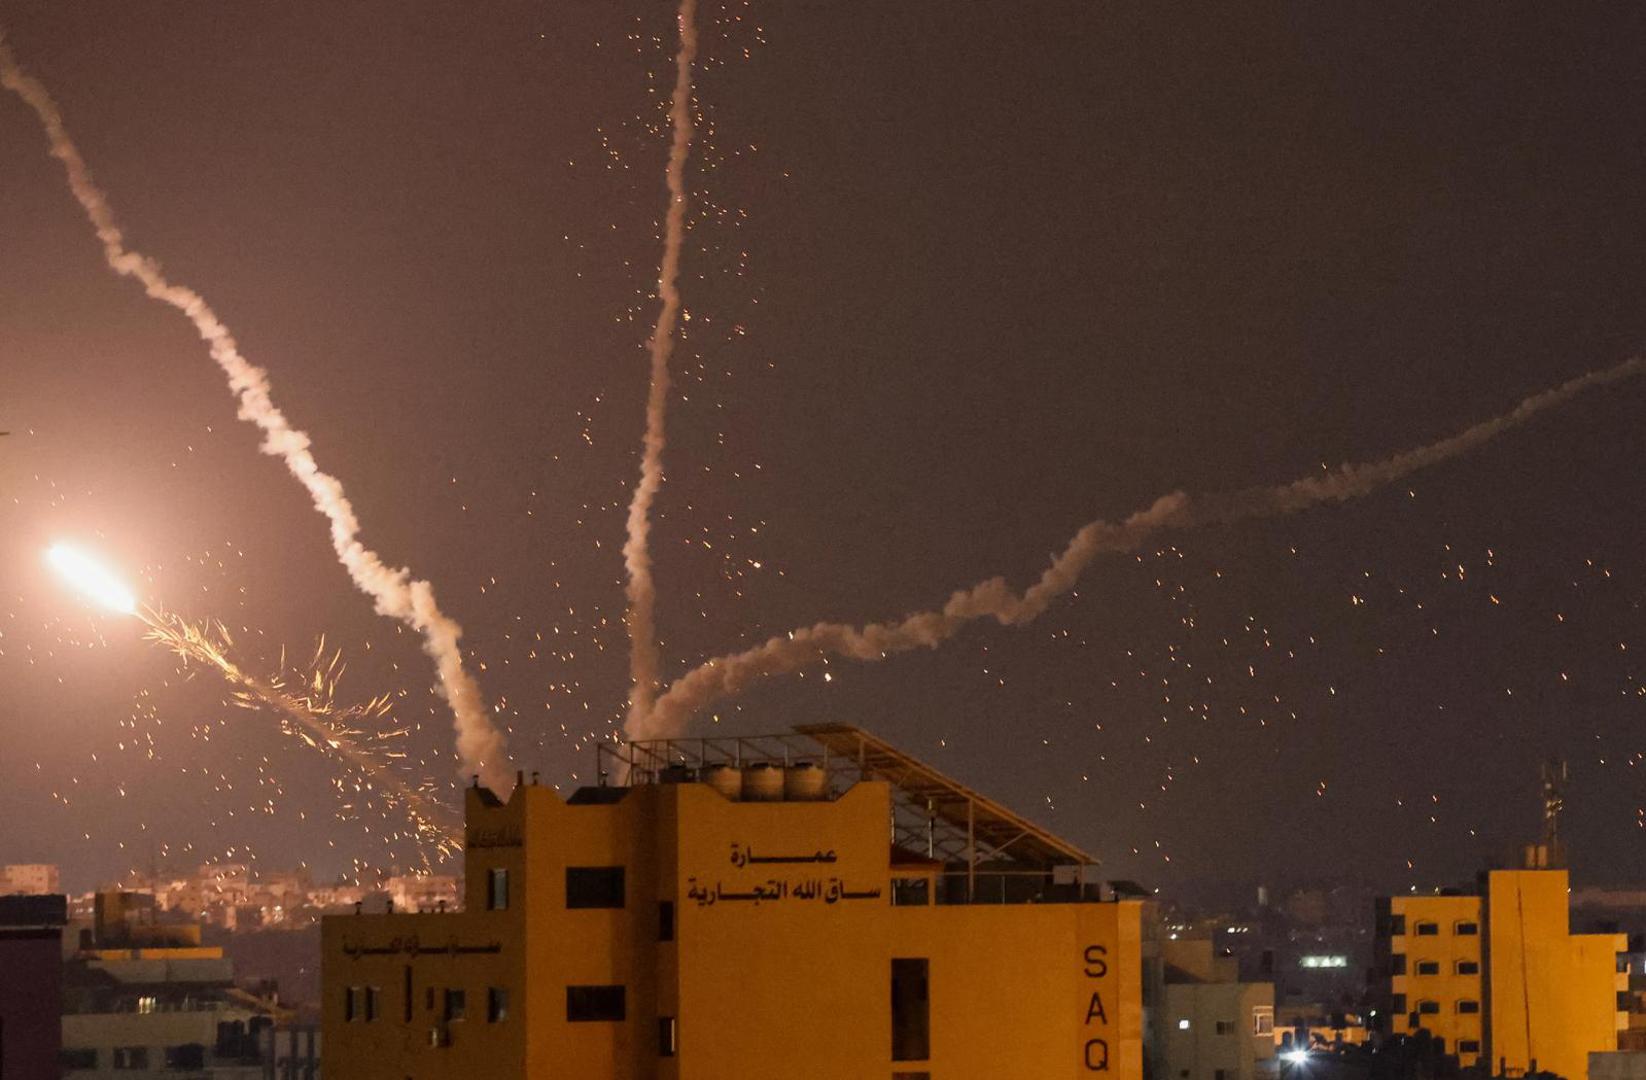 Trails of smoke from rockets fired by Palestinian militants into Israel are pictured, amid Israeli-Palestinian fighting, in Gaza August 5, 2022. REUTERS/Ibraheem Abu Mustafa Photo: IBRAHEEM ABU MUSTAFA/REUTERS